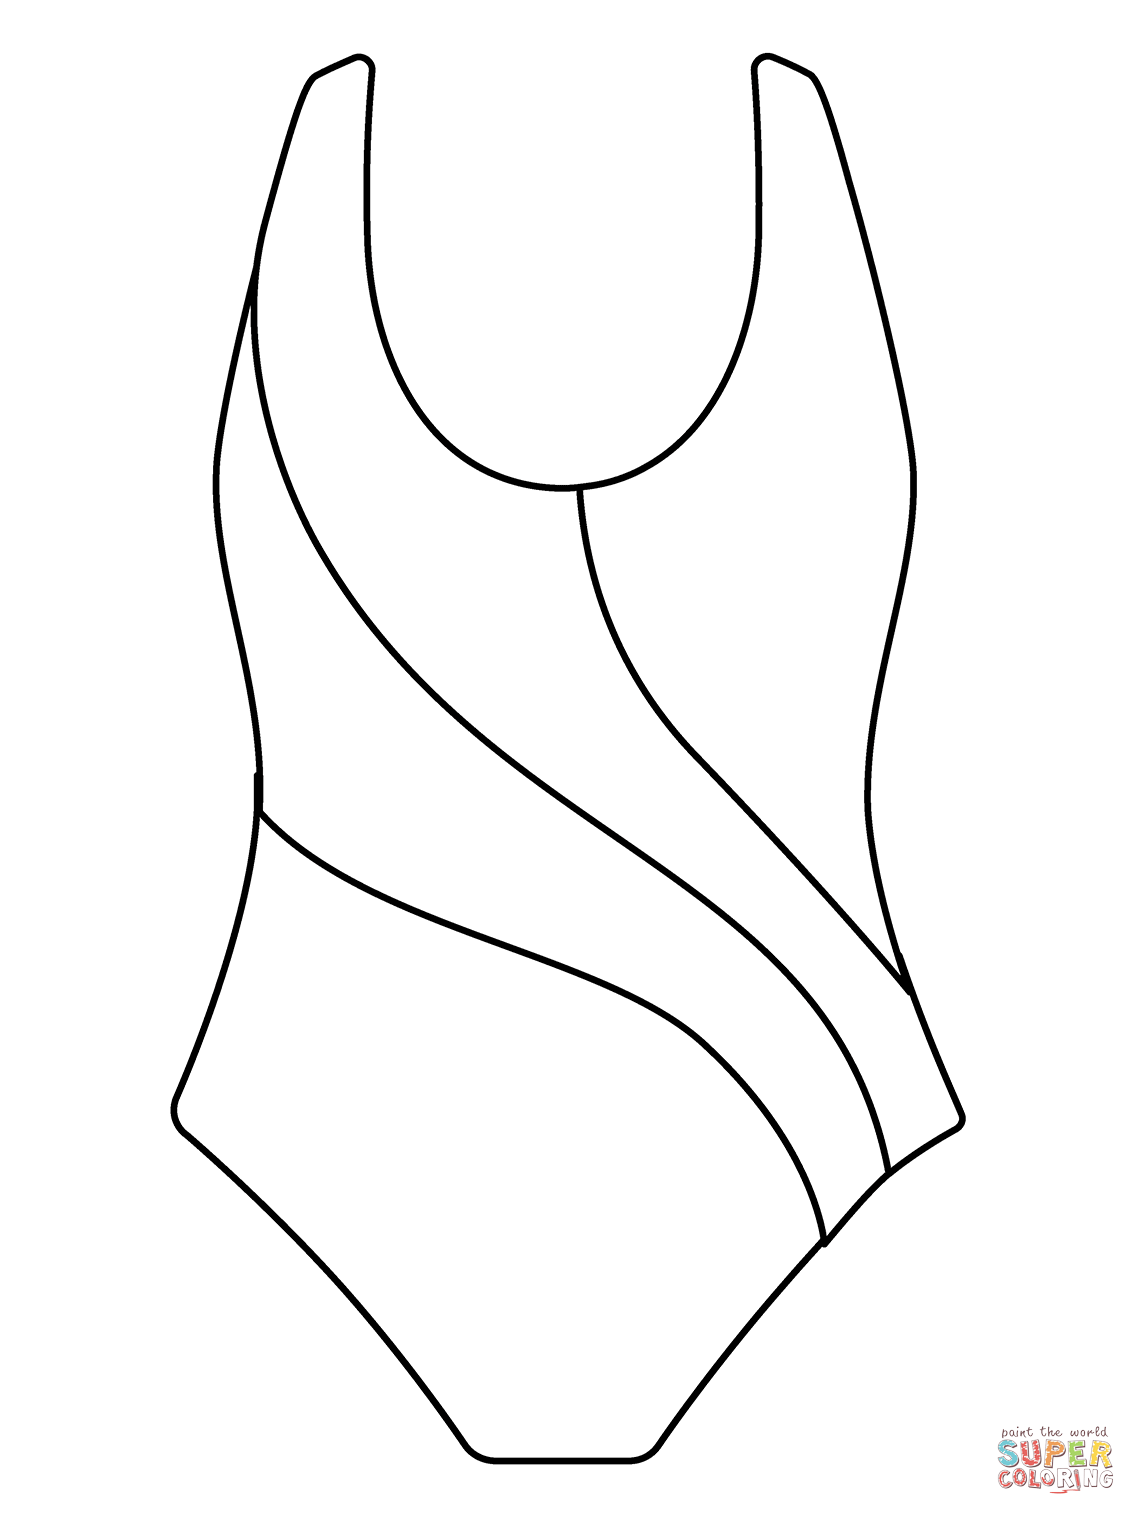 One Piece Swimsuit Emoji coloring page | Free Printable Coloring Pages